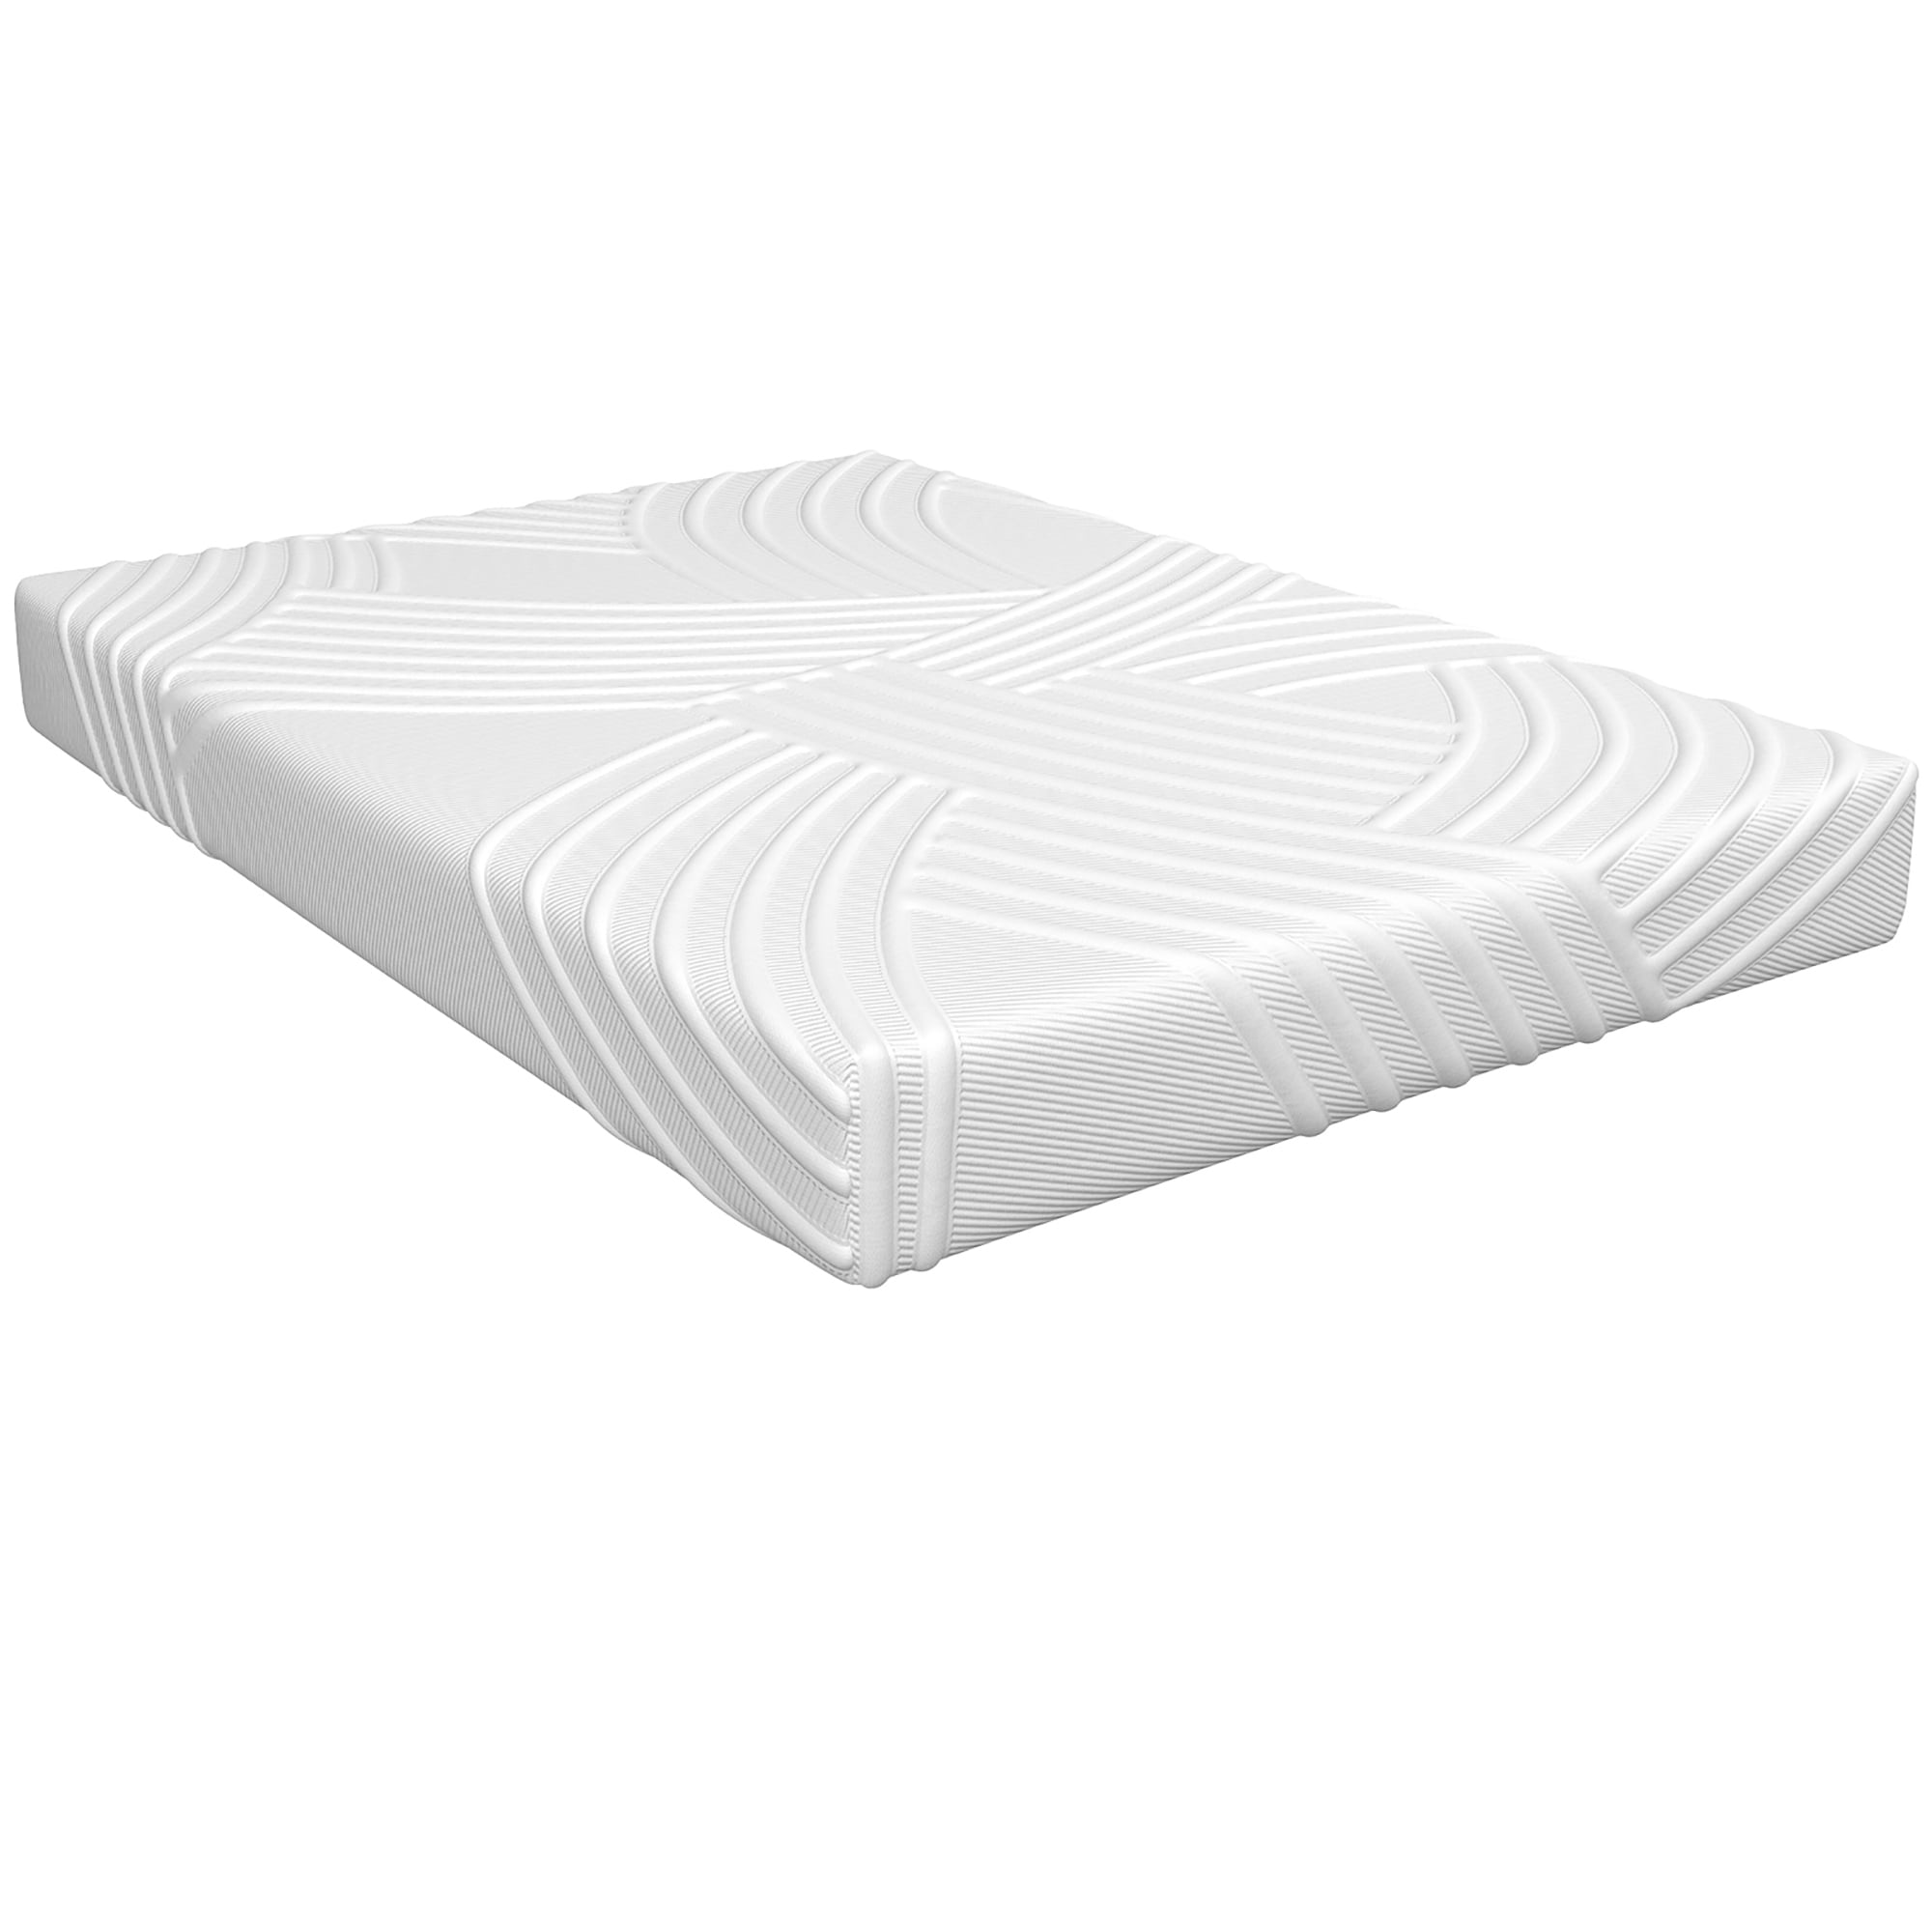 Details about   Milliard 2-Inch Ventilated Memory Foam Crib/Toddler Bed Mattress Topper 